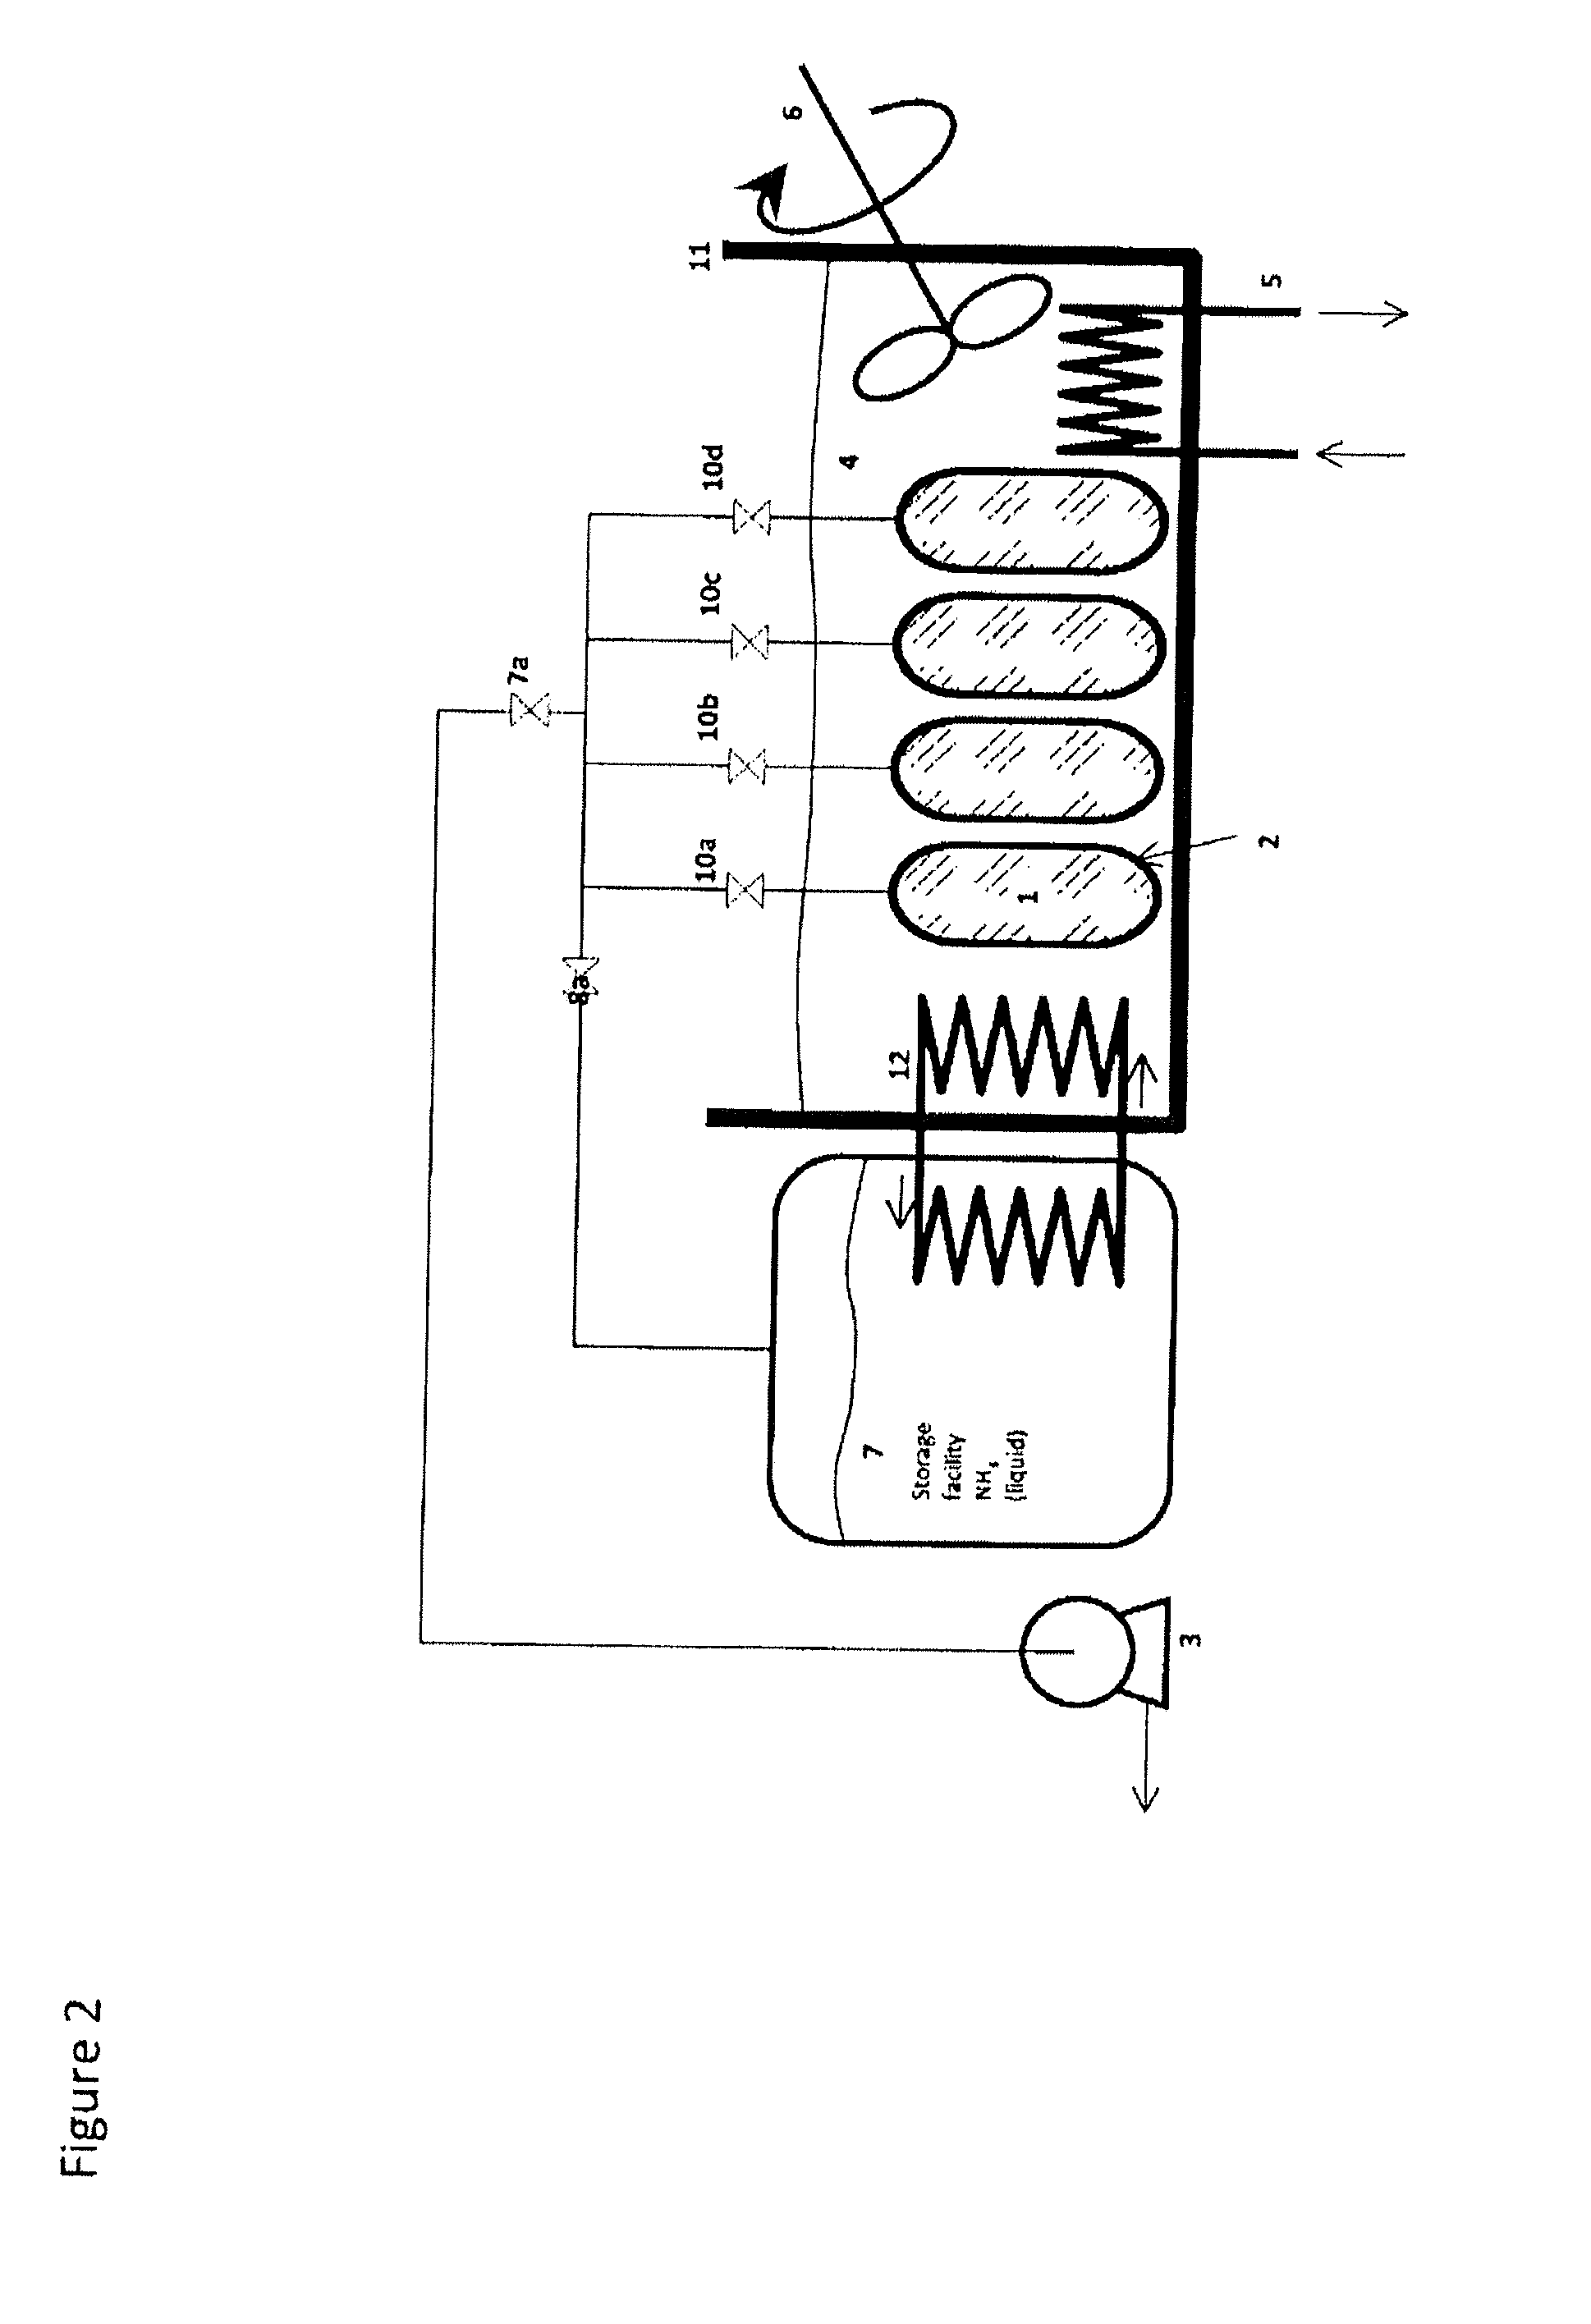 Method for Saturating and Re-Saturating Ammonia Storage Material in Containers